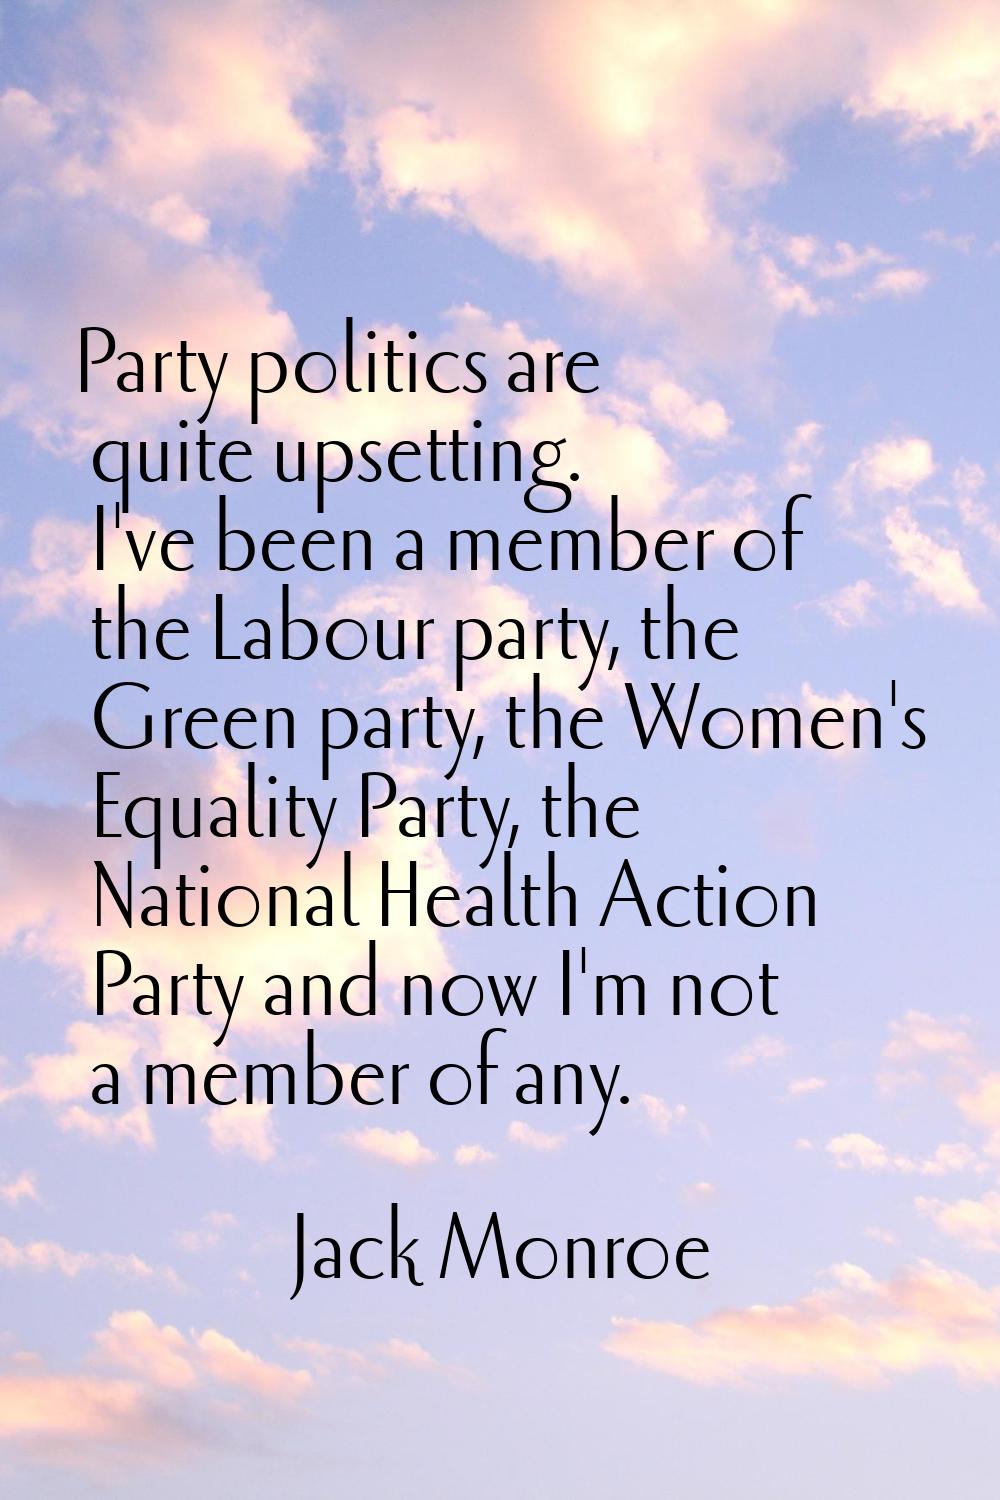 Party politics are quite upsetting. I've been a member of the Labour party, the Green party, the Wo